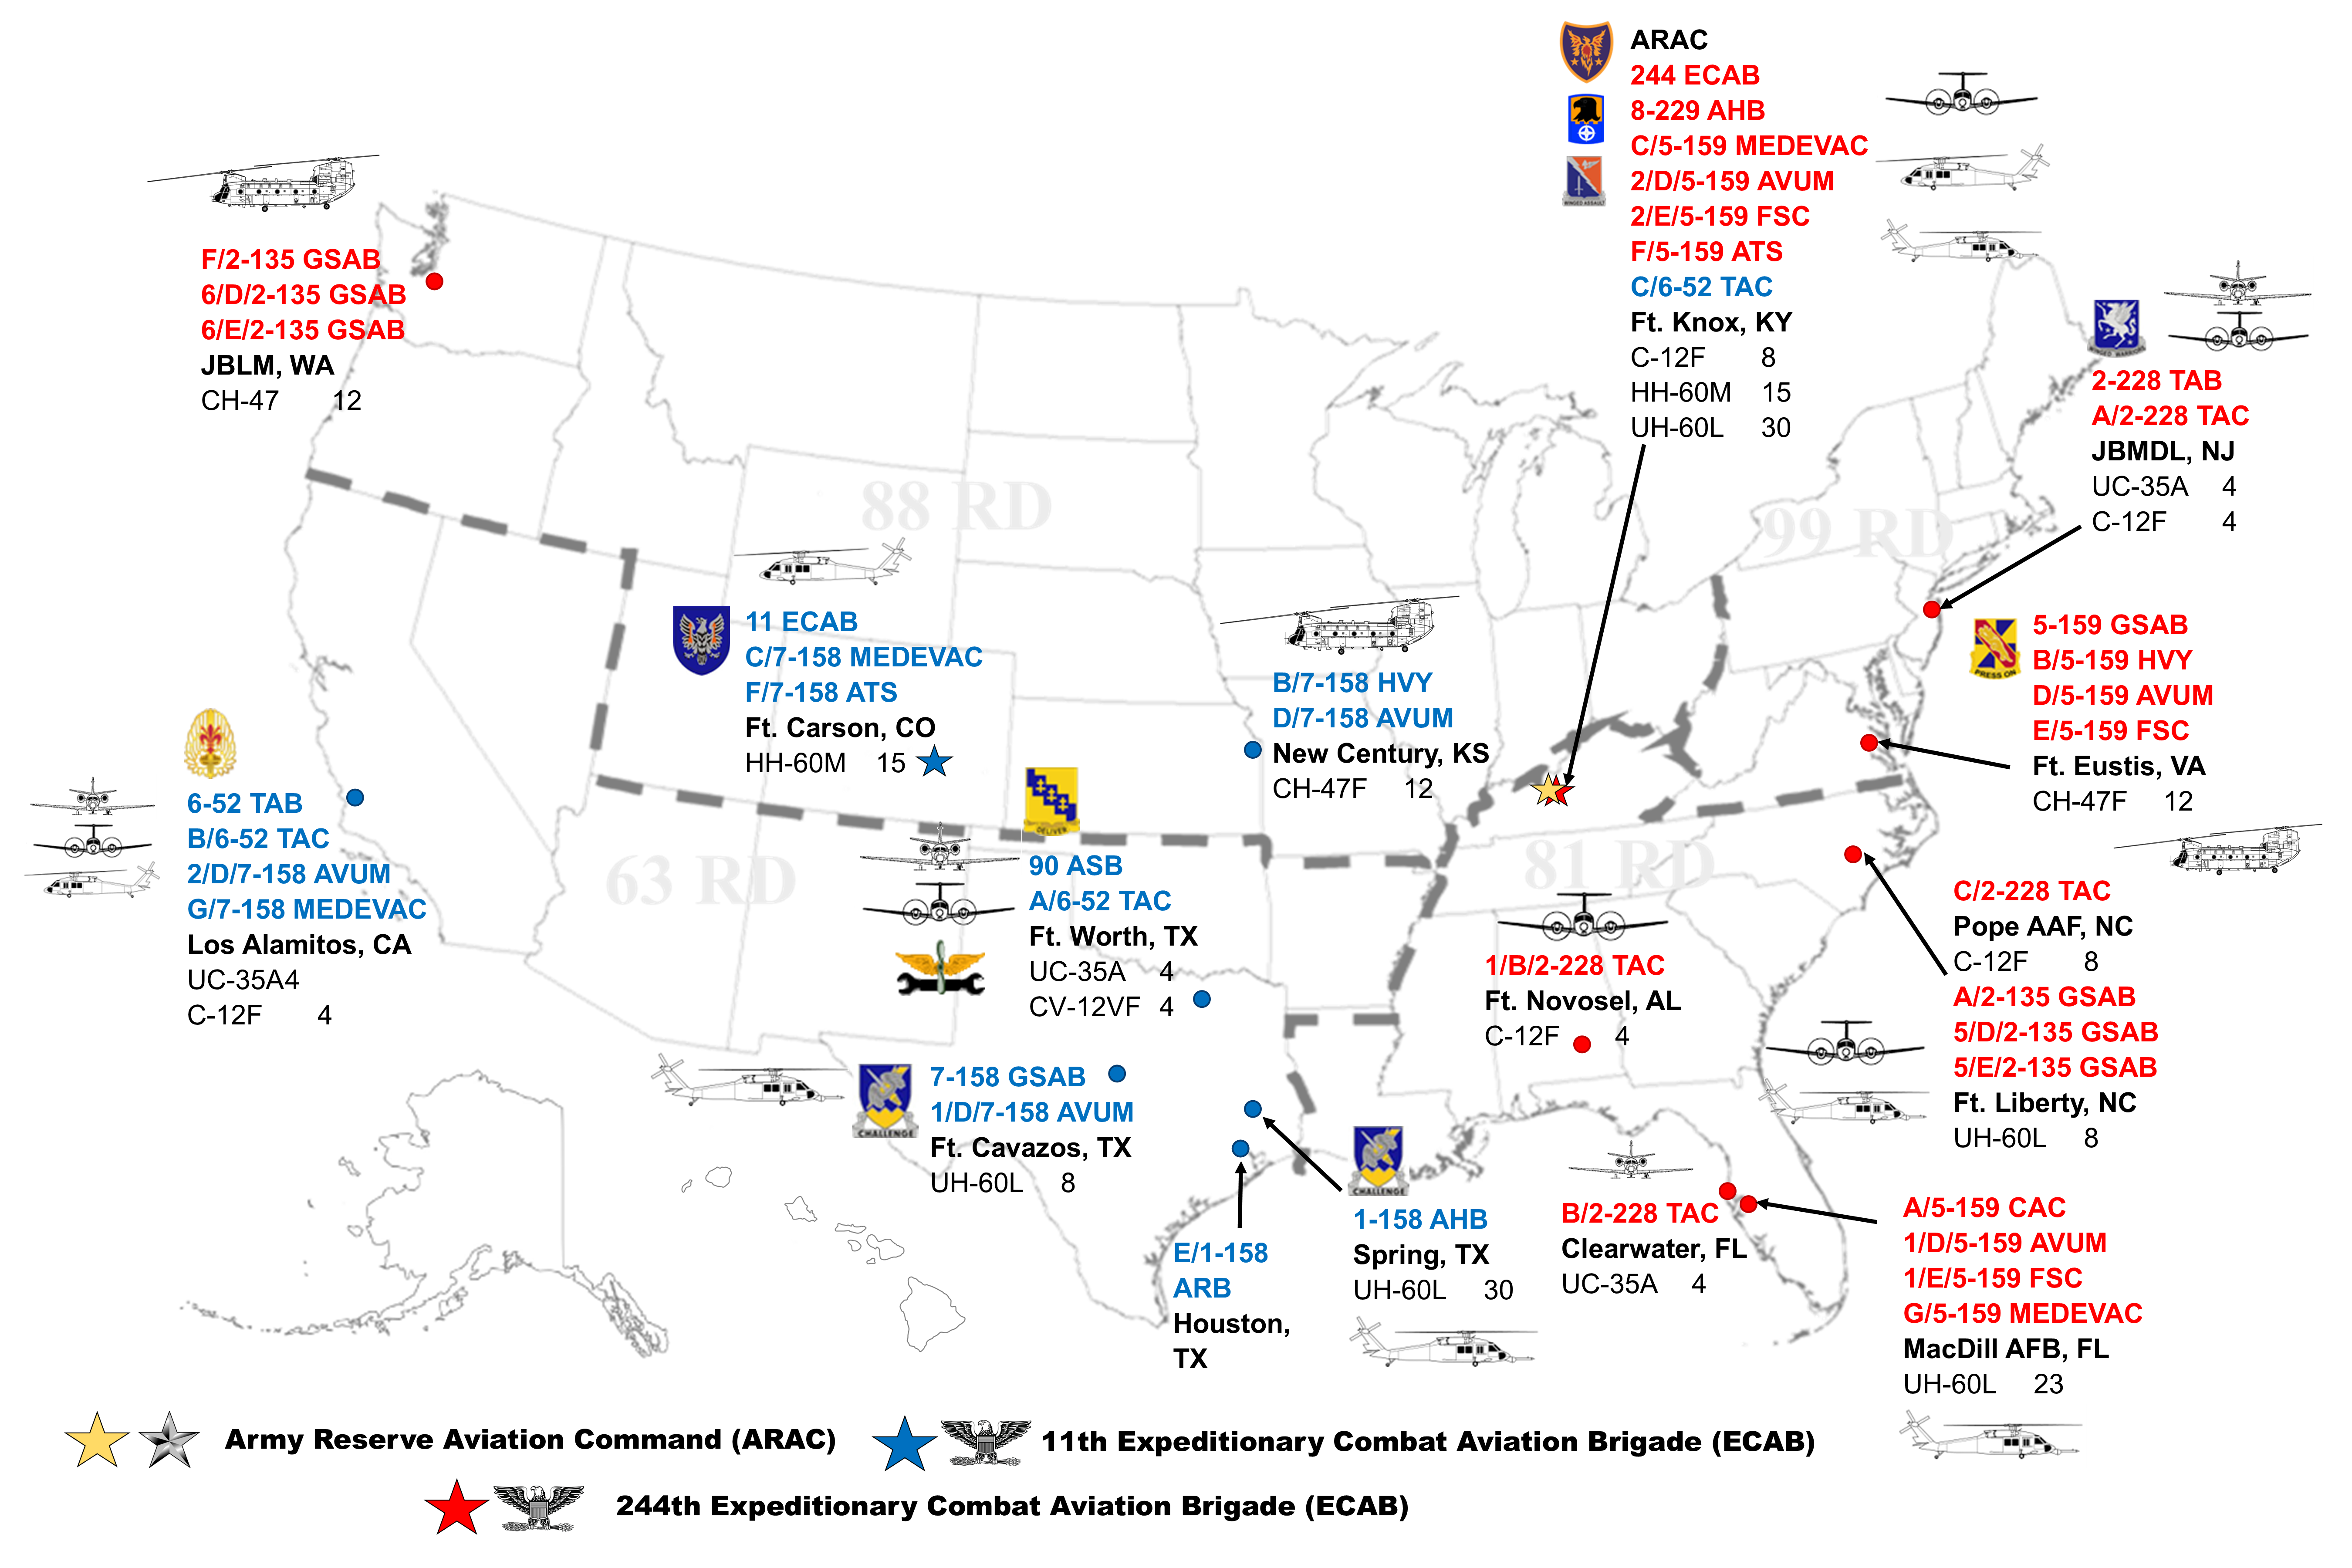 Map of Army Reserve Aviation locations